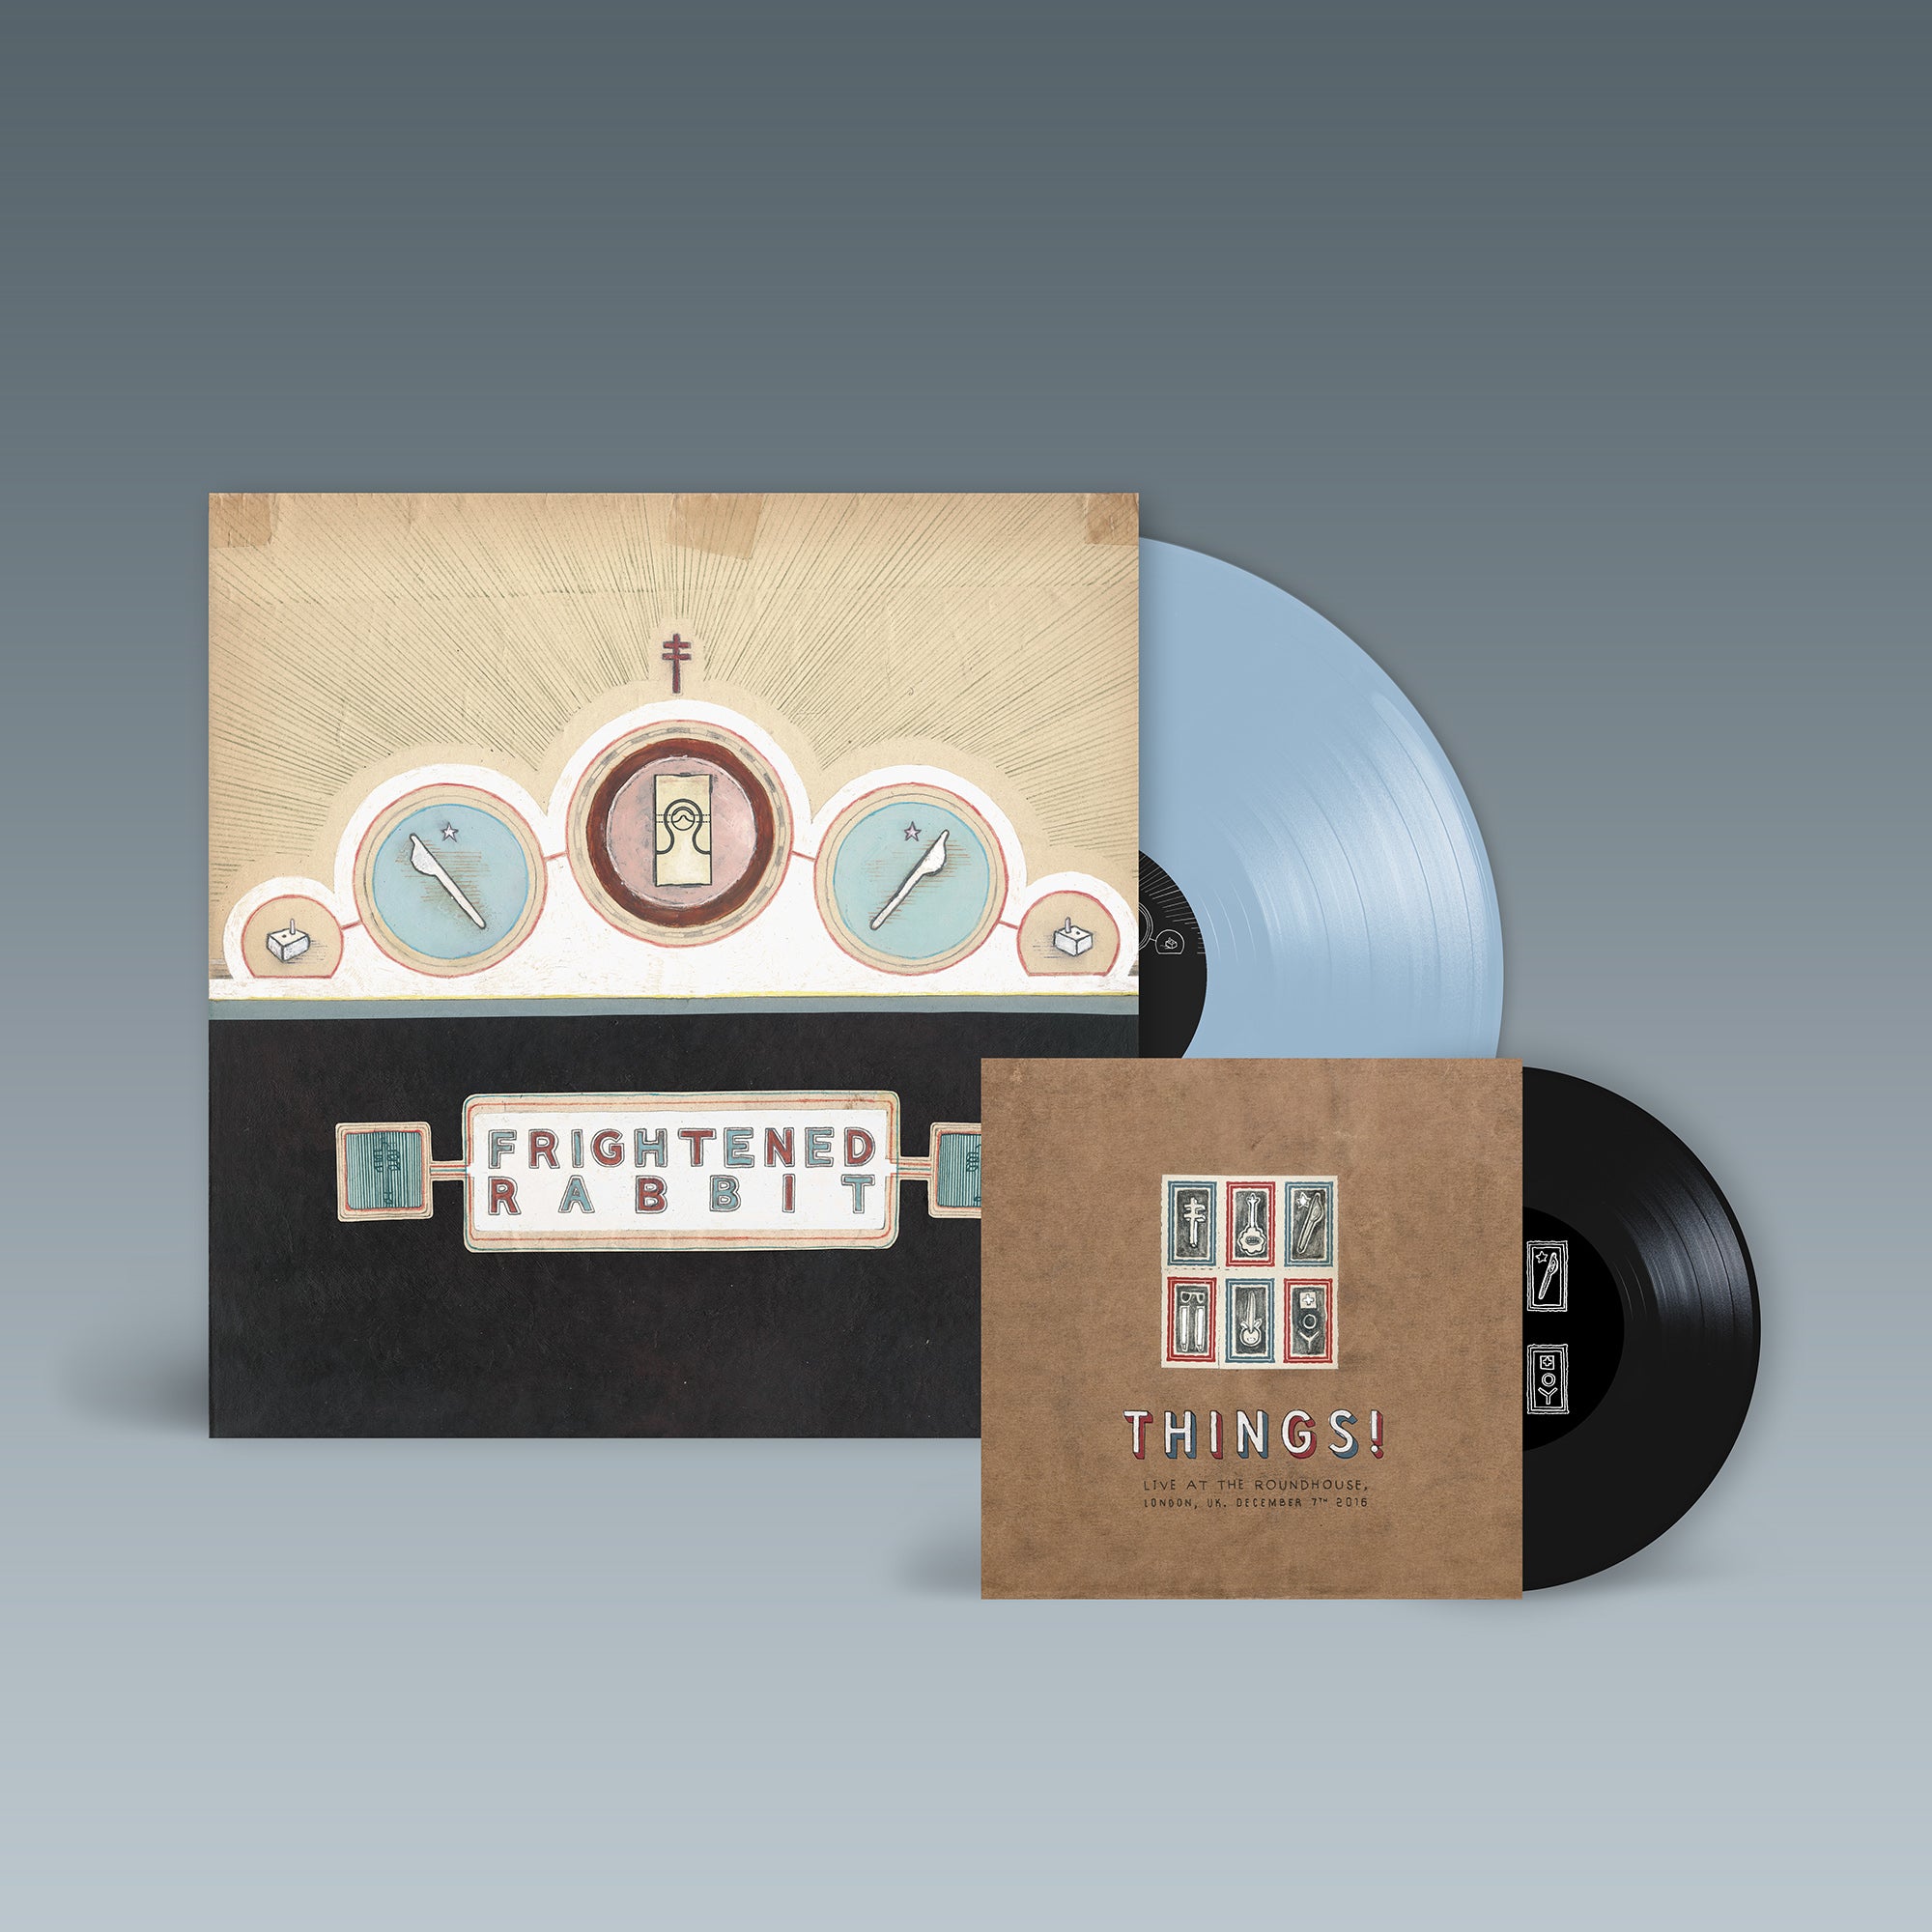 Frightened Rabbit - The Winter Of Mixed Drinks - 10th Anniversary Edition (Ice Blue Vinyl + 7" Single)